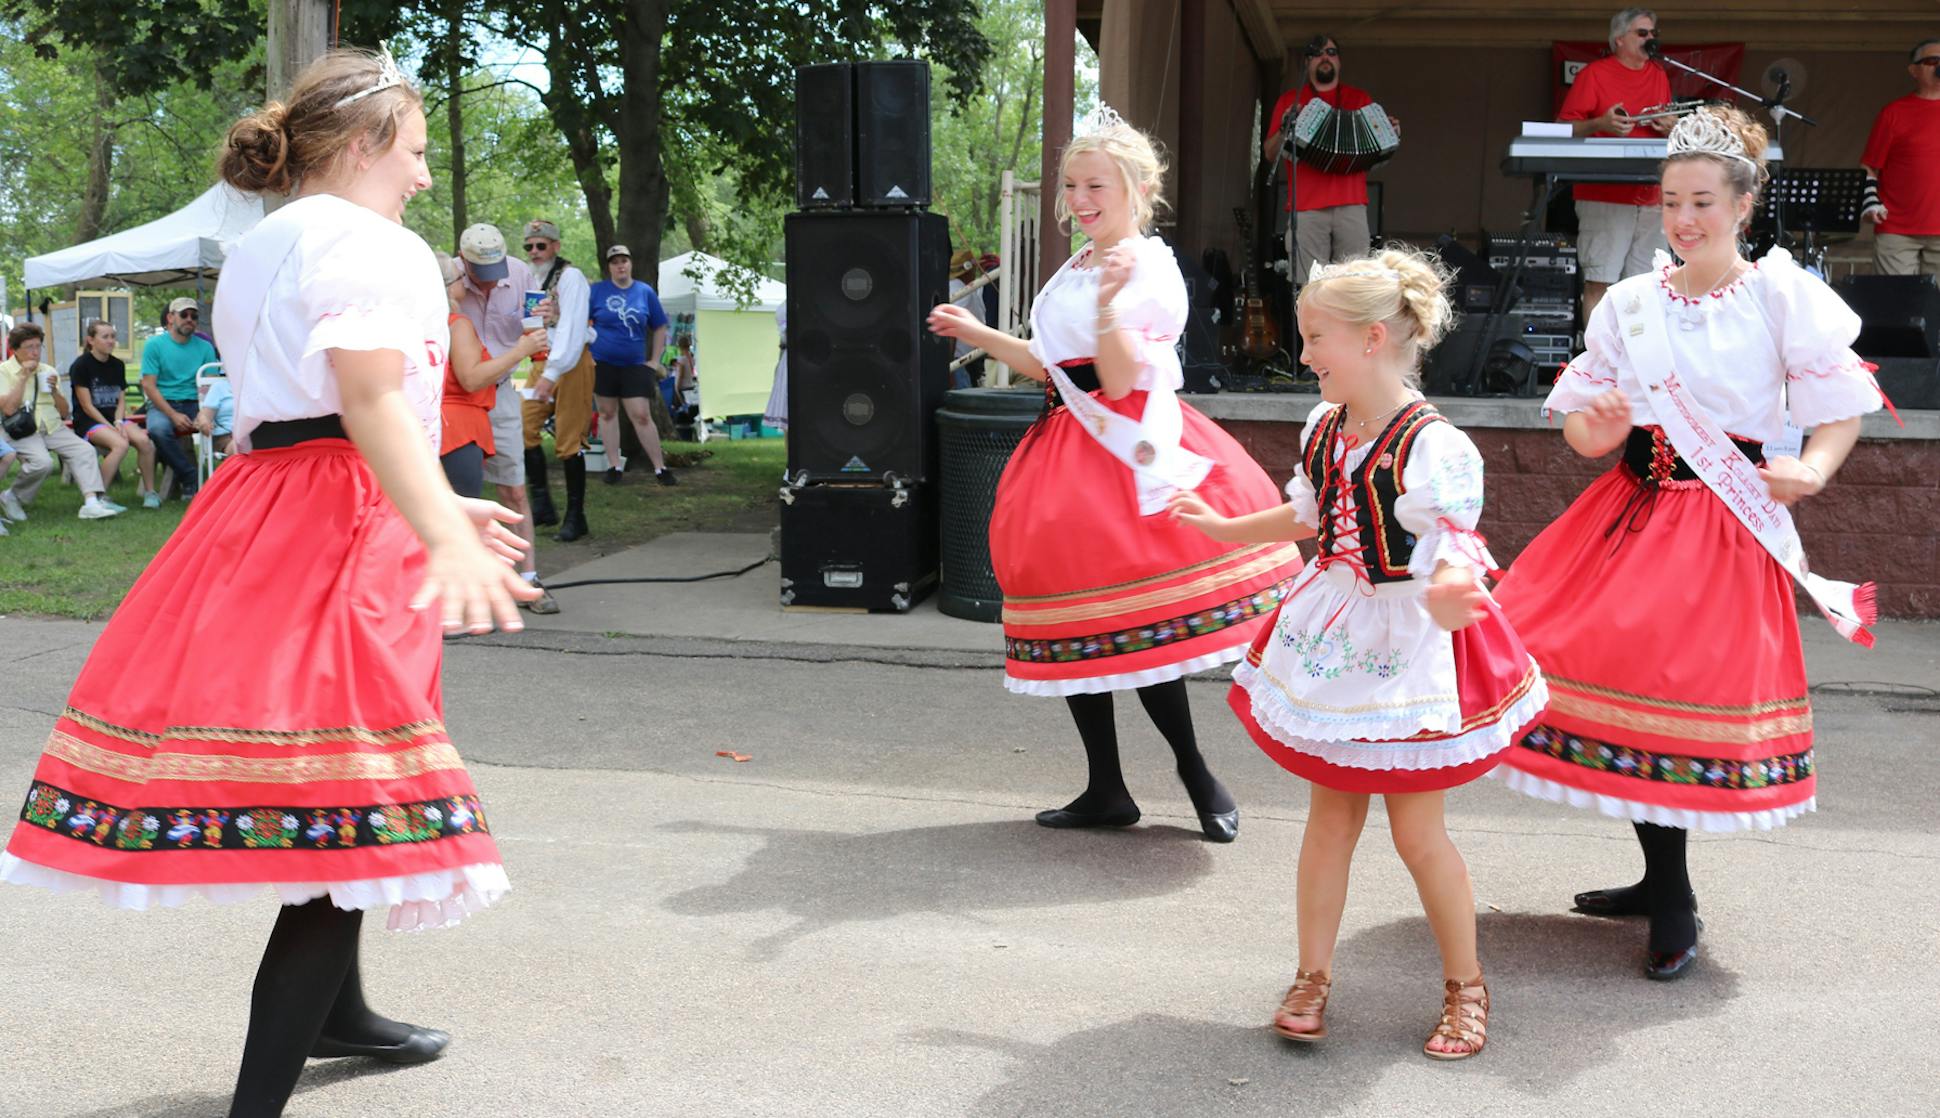 Kolacky Days in Montgomery, Minn., salutes the city's Czech heritage. Marisa Rotter -- a former Kolacky Queen herself -- took this photo of her daughter dancing in the park with this year's Kolacky Days royalty at the 82nd annual festival.